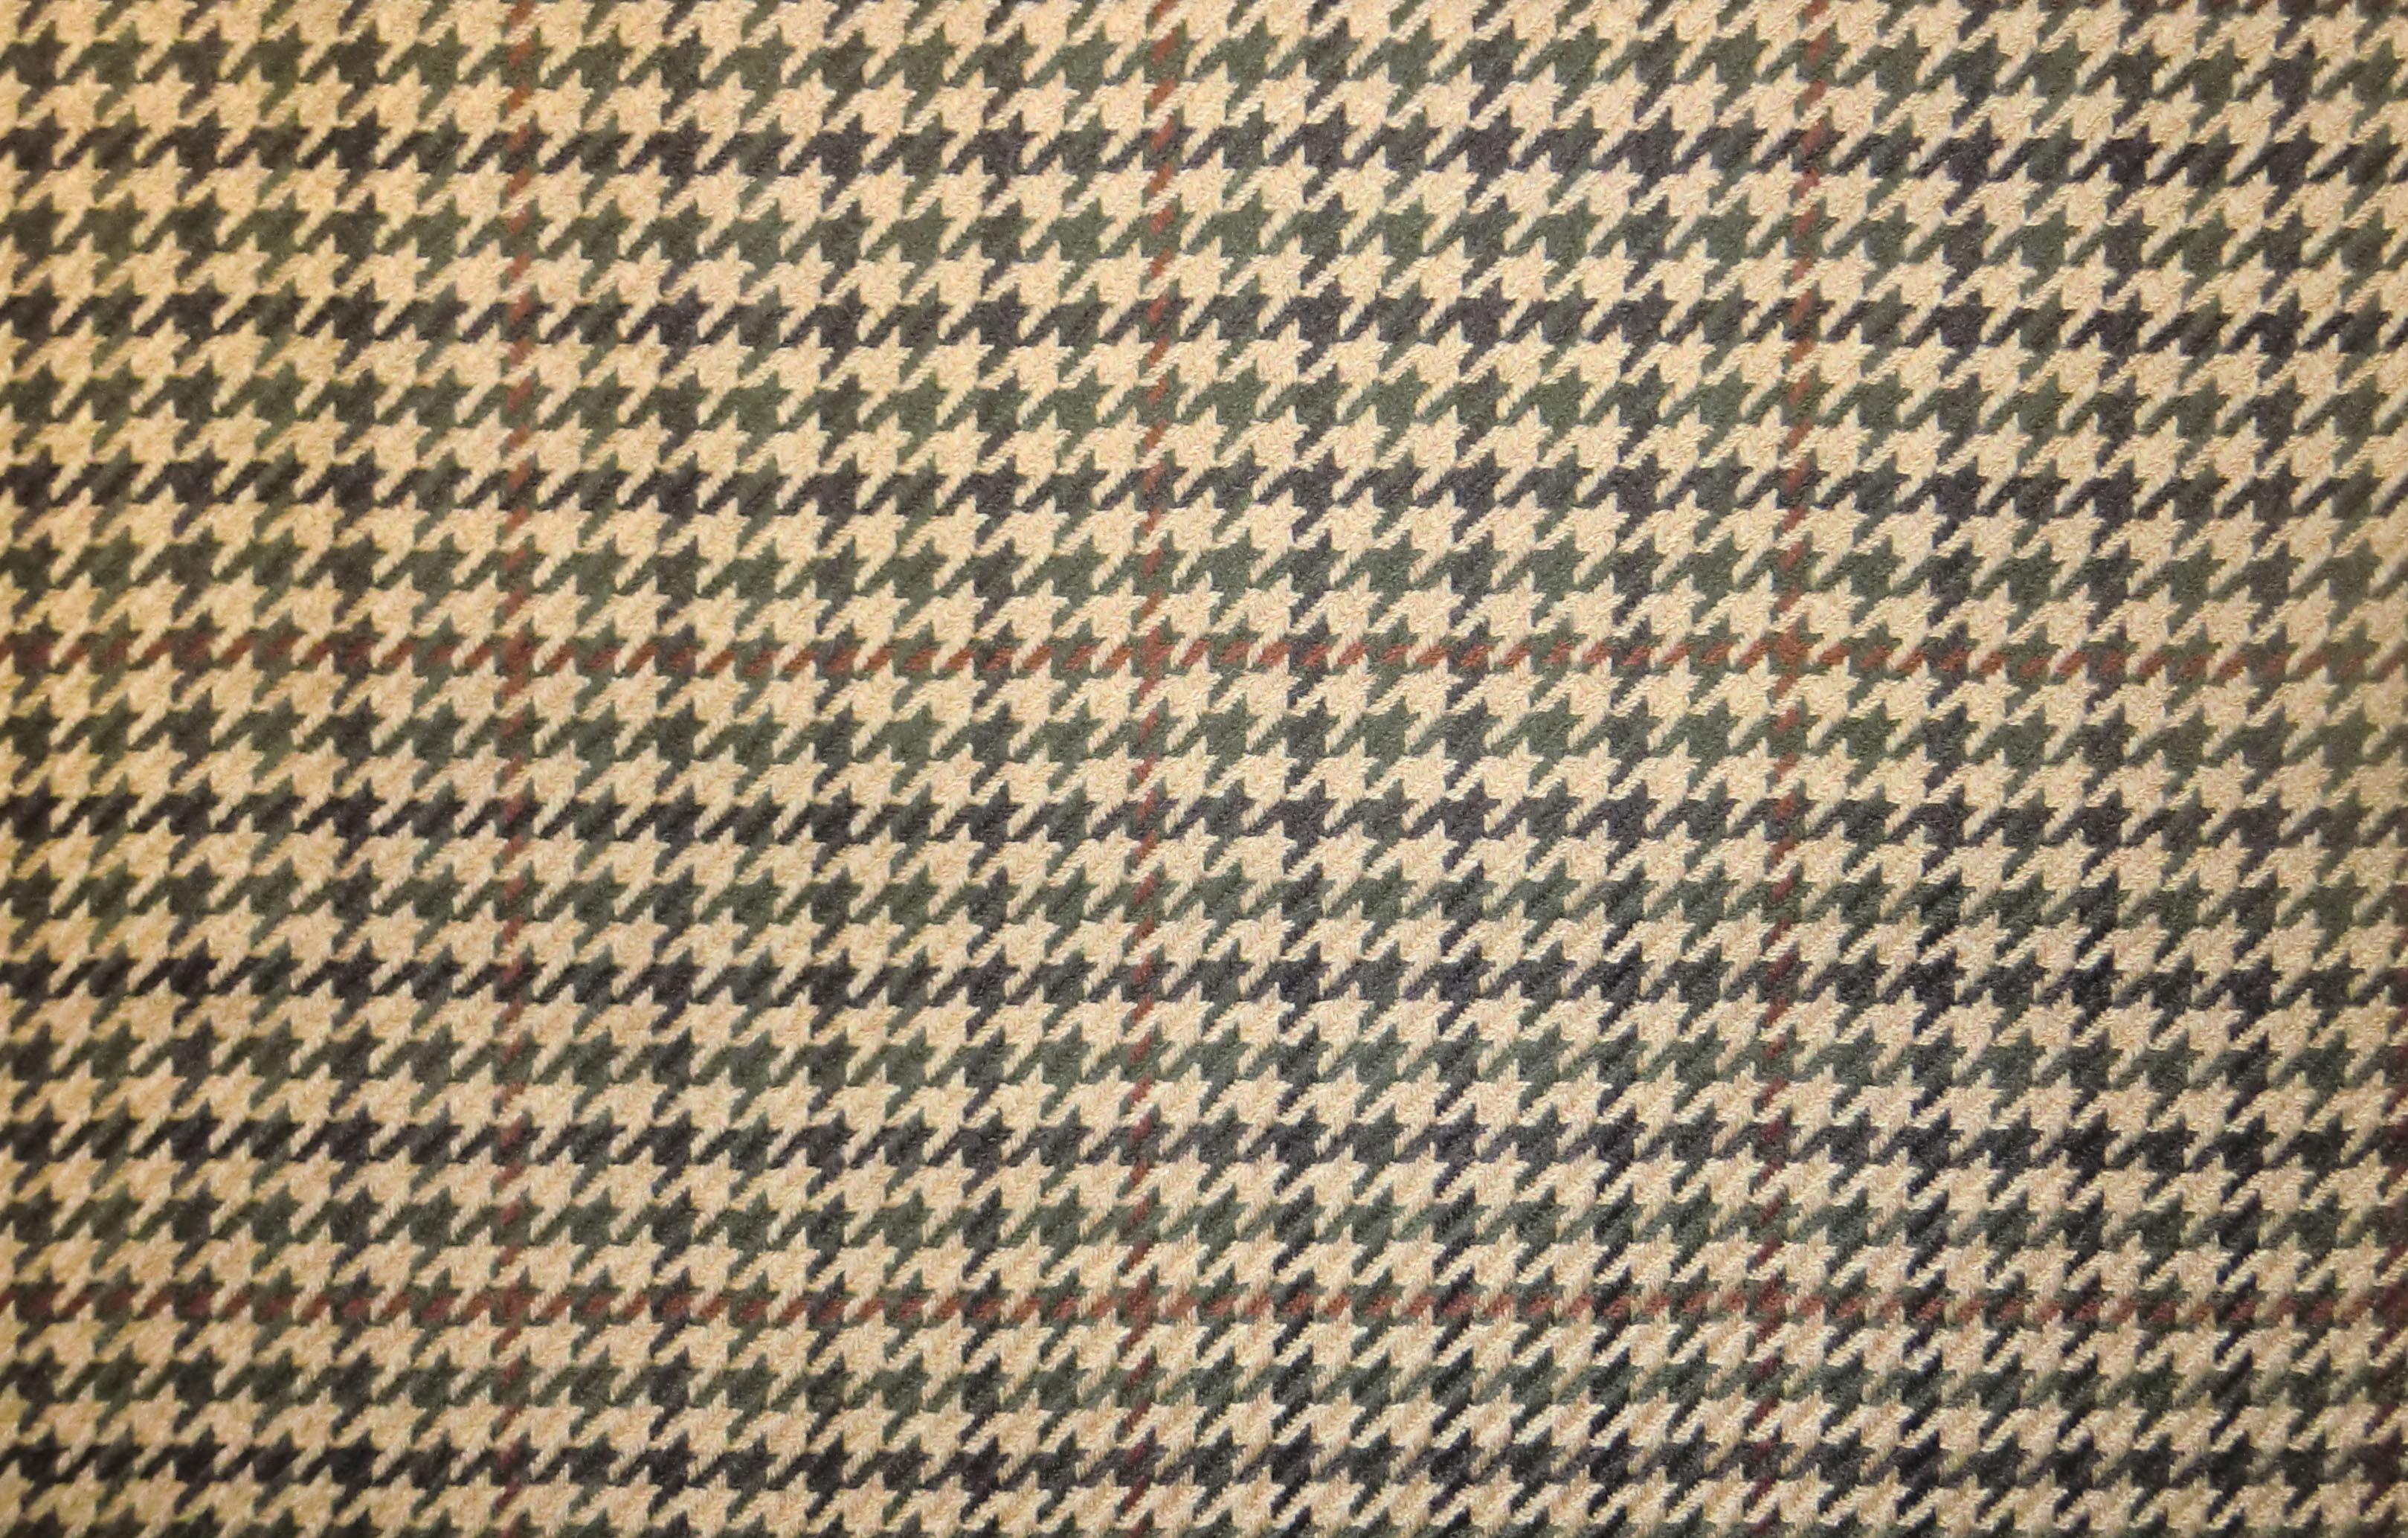 Ralph Lauren Munnings Houndstooth Tweed Search Results